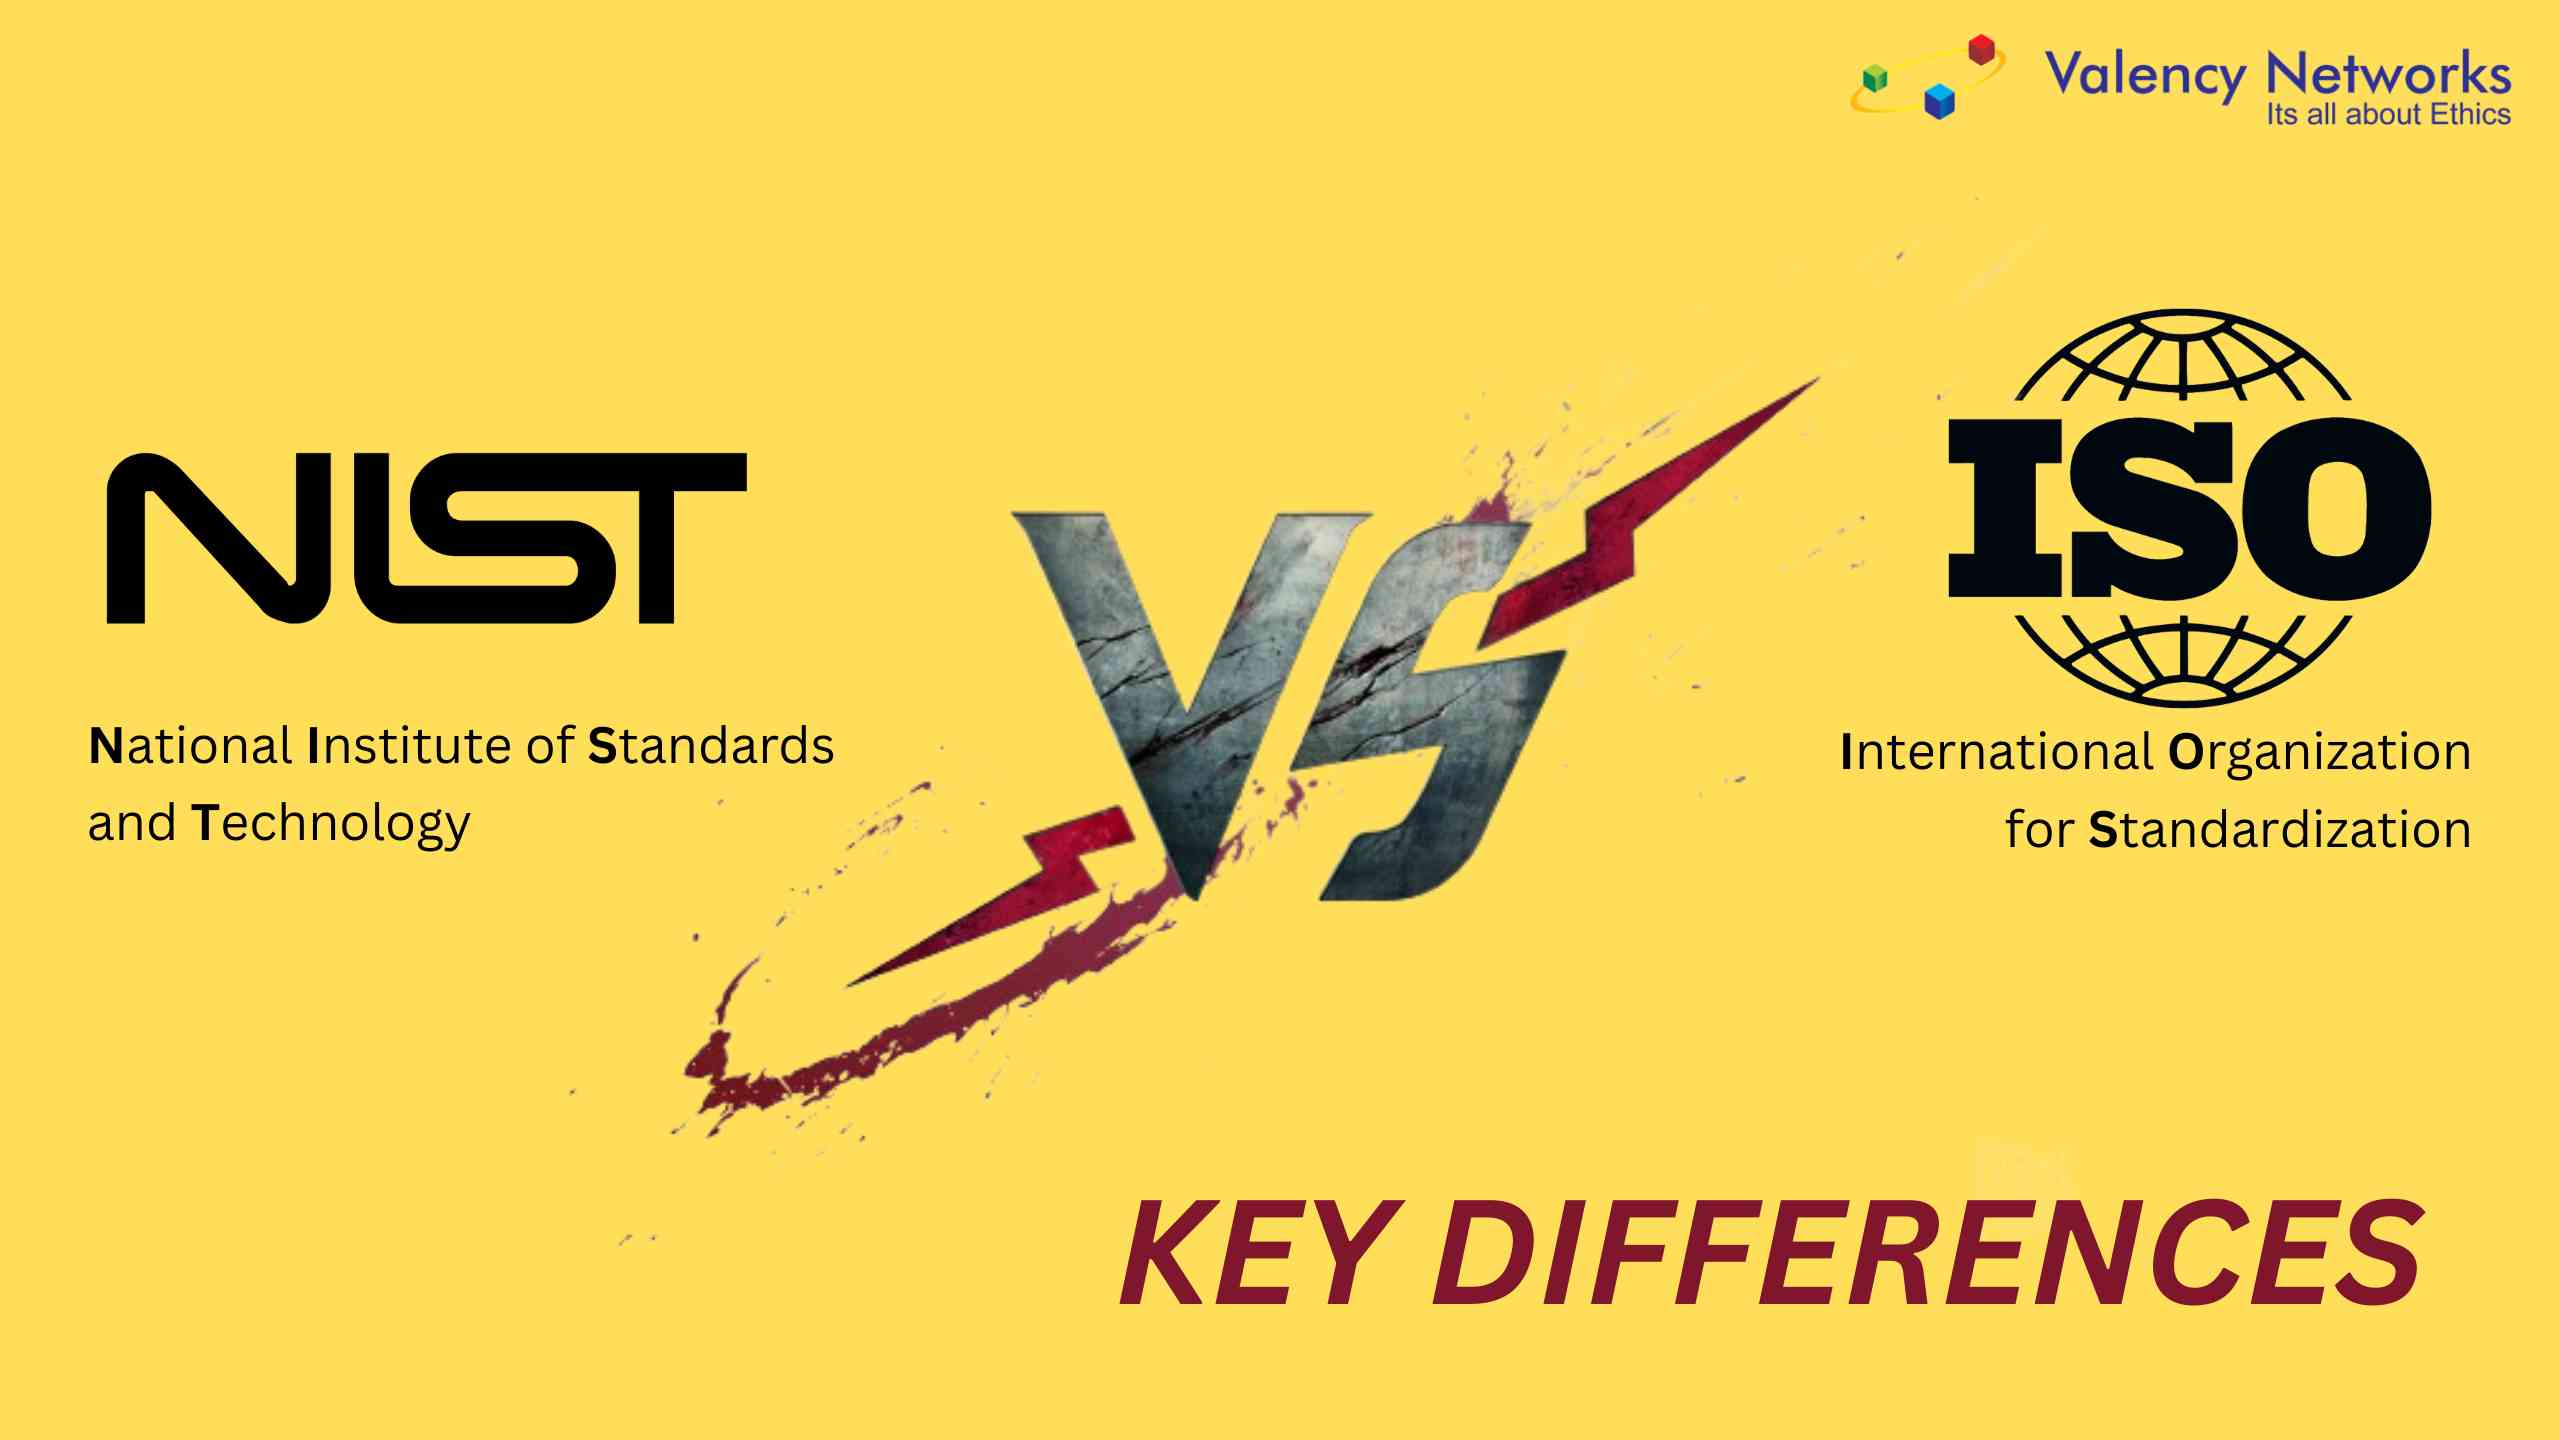 What is the difference between ISO 27001 and NIST